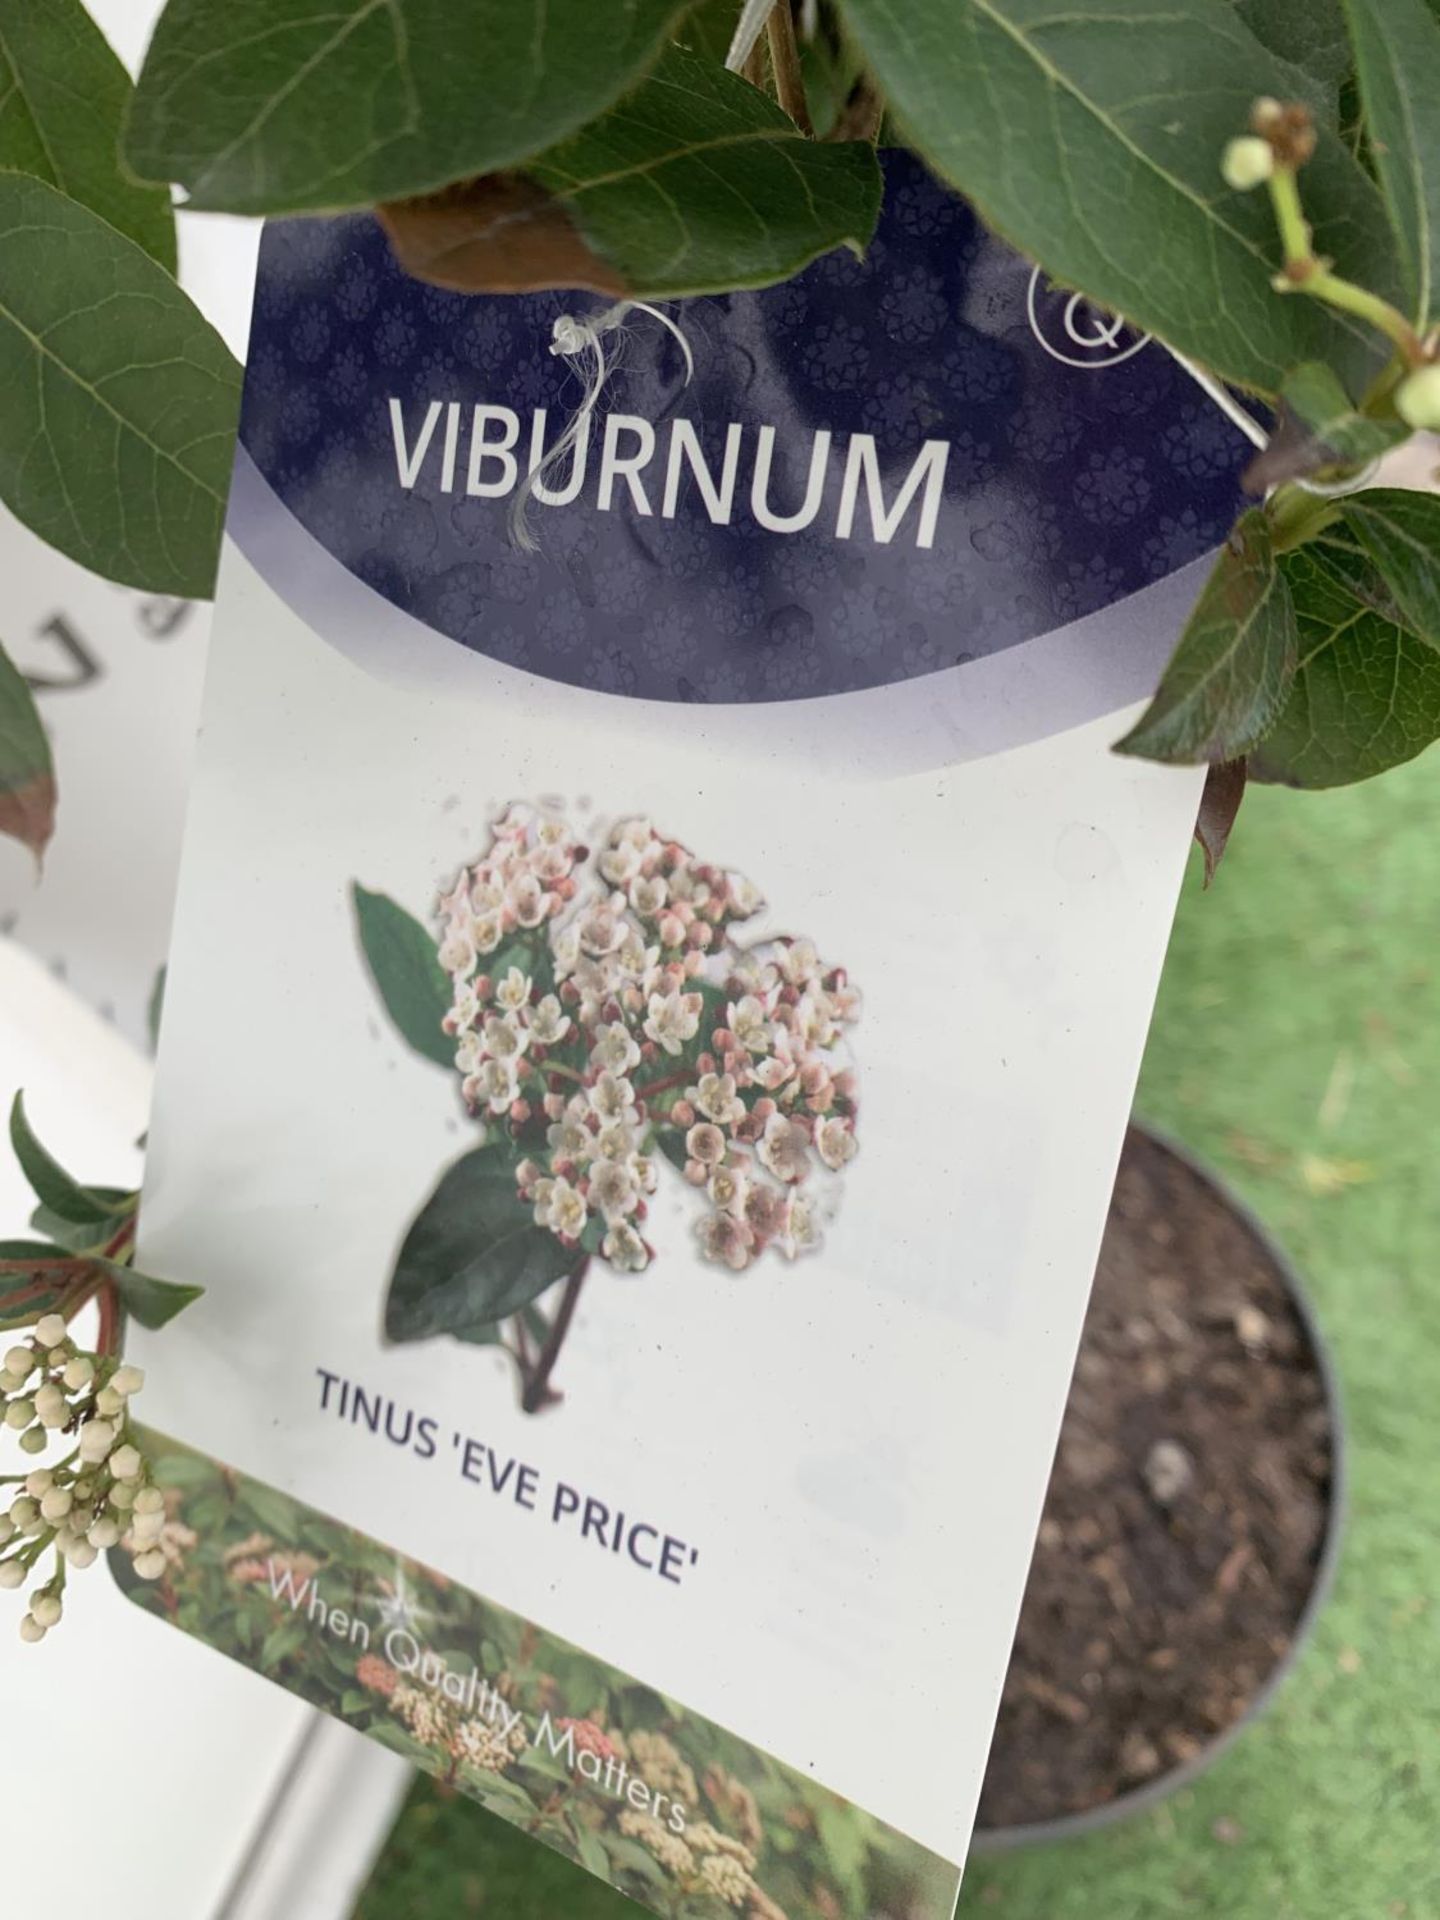 ONE VIBURNUM TINUS STANDARD TREE 'EVE PRICE' APPROX 140CM IN HEIGHT IN A 10 LTR POT PLUS VAT - Image 5 of 7